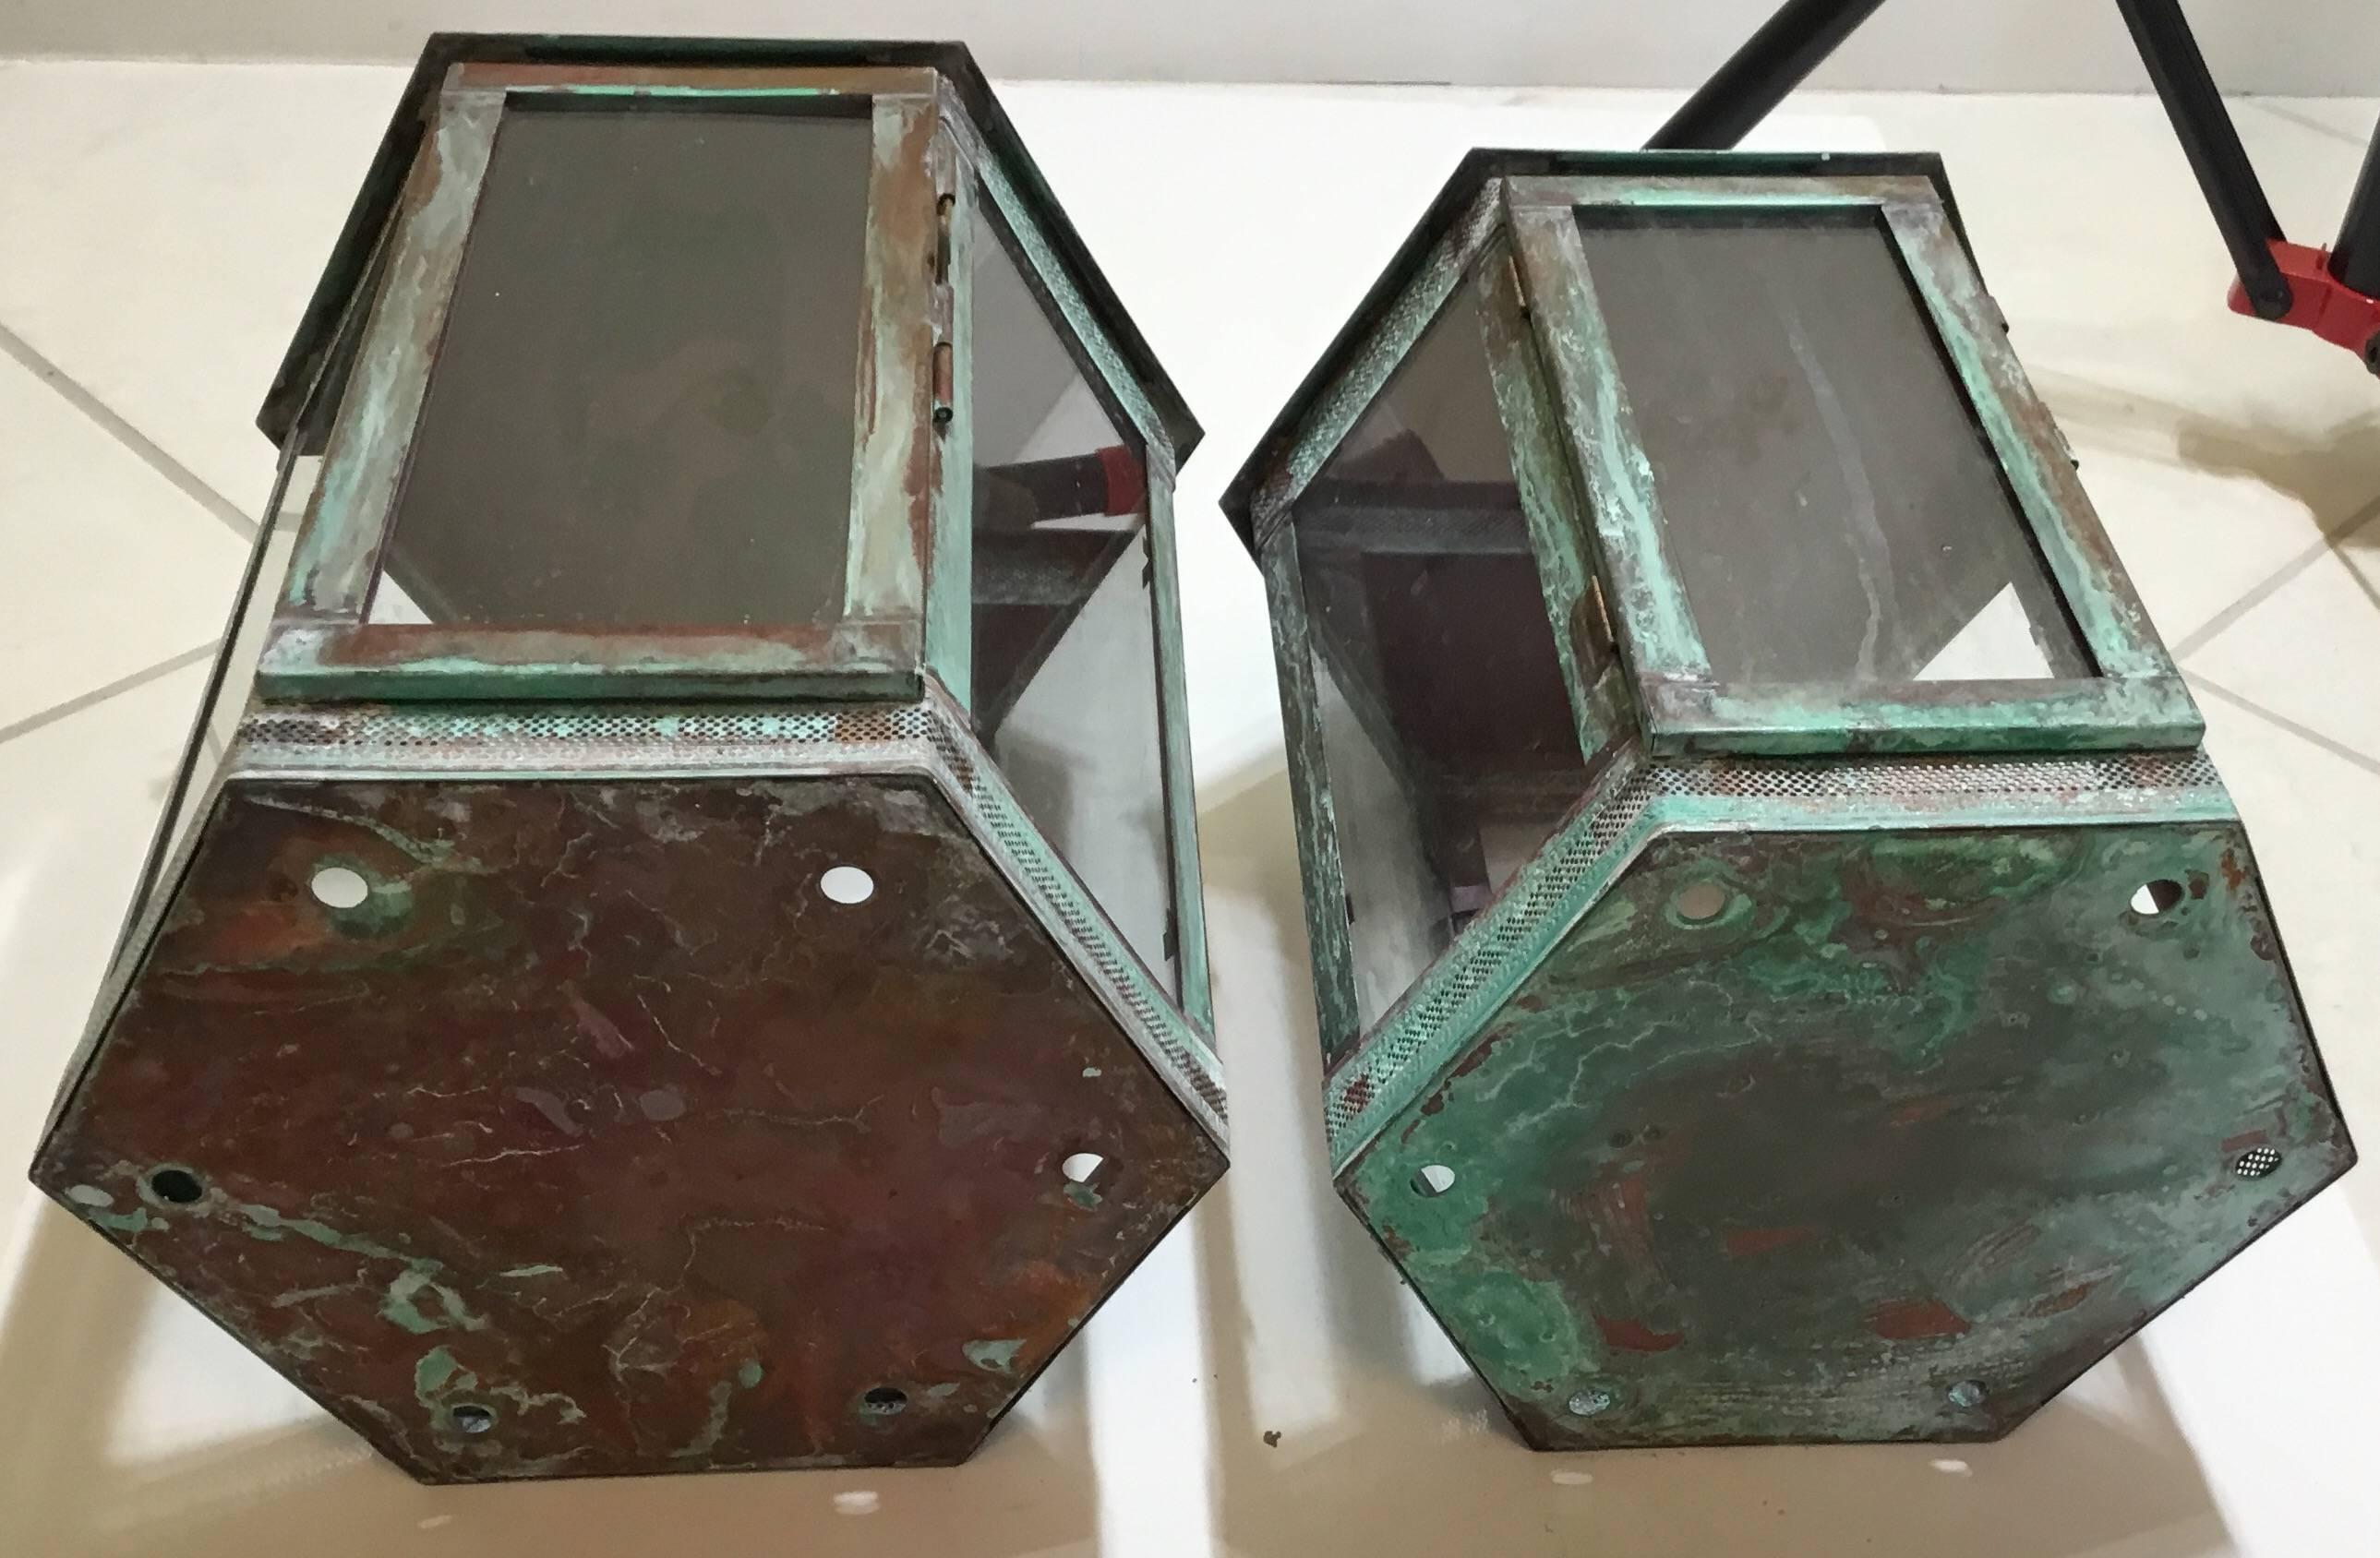 Beautiful pair of lanterns made of copper and brass trimming for candle.
Could be use in dry or wet location, great for party in the garden.
Two sizes.
1. 19